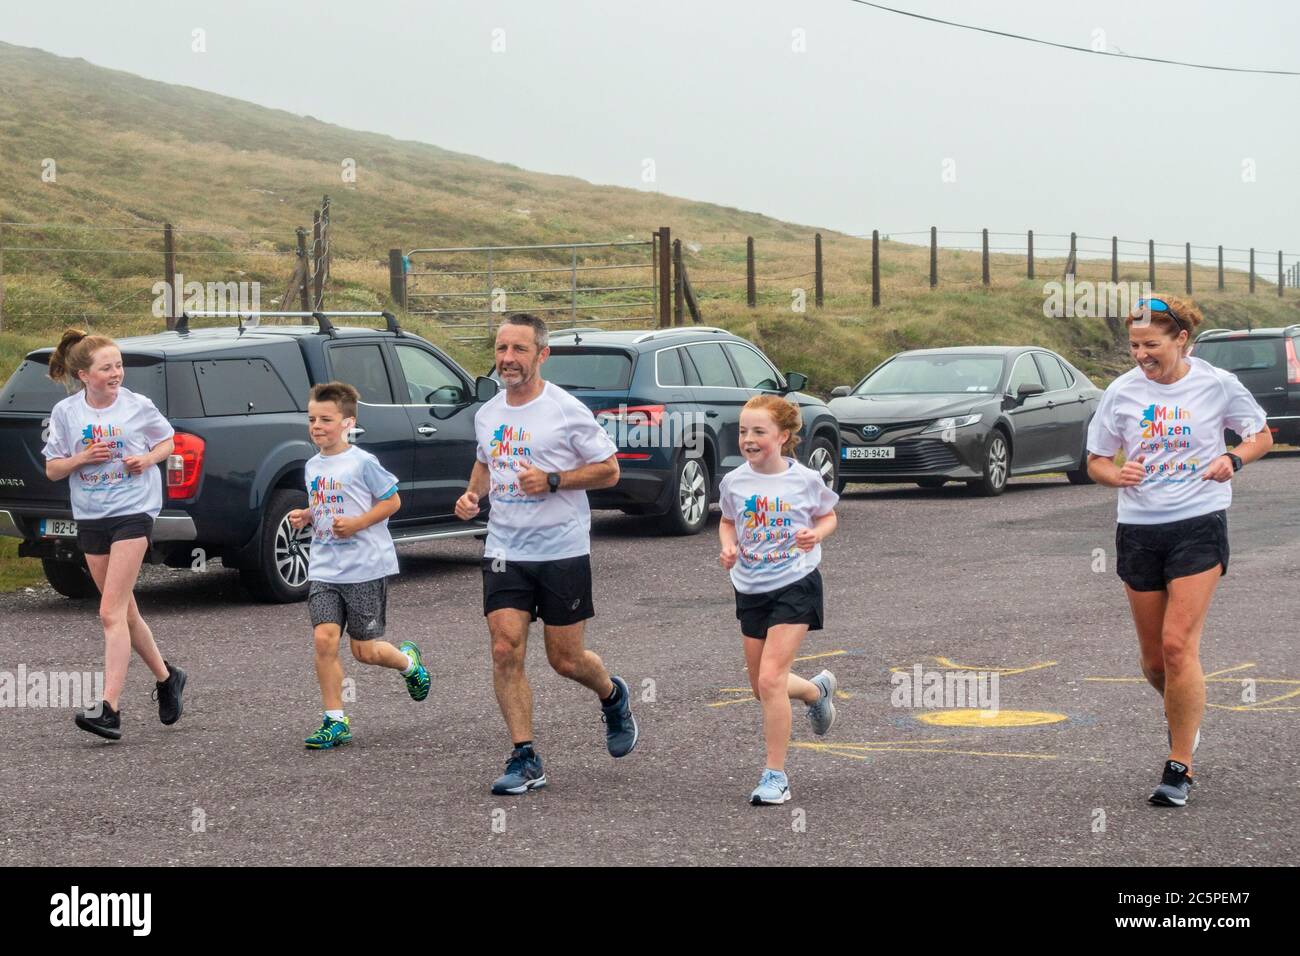 West Cork, Ireland. 4th July, 2020. Barry Sheehan, who lives in Cork, has ran 600 kms from Malin to Mizen Head in aid of the new children's unit 'Cappagh Kids' of National Orthopaedic Hospital, Cappagh, Dublin. Barry is pictured approaching the finish line with his wife, Jen and his children, Grace, Michael and Ciara. Credit: AG News/Alamy Live News Stock Photo